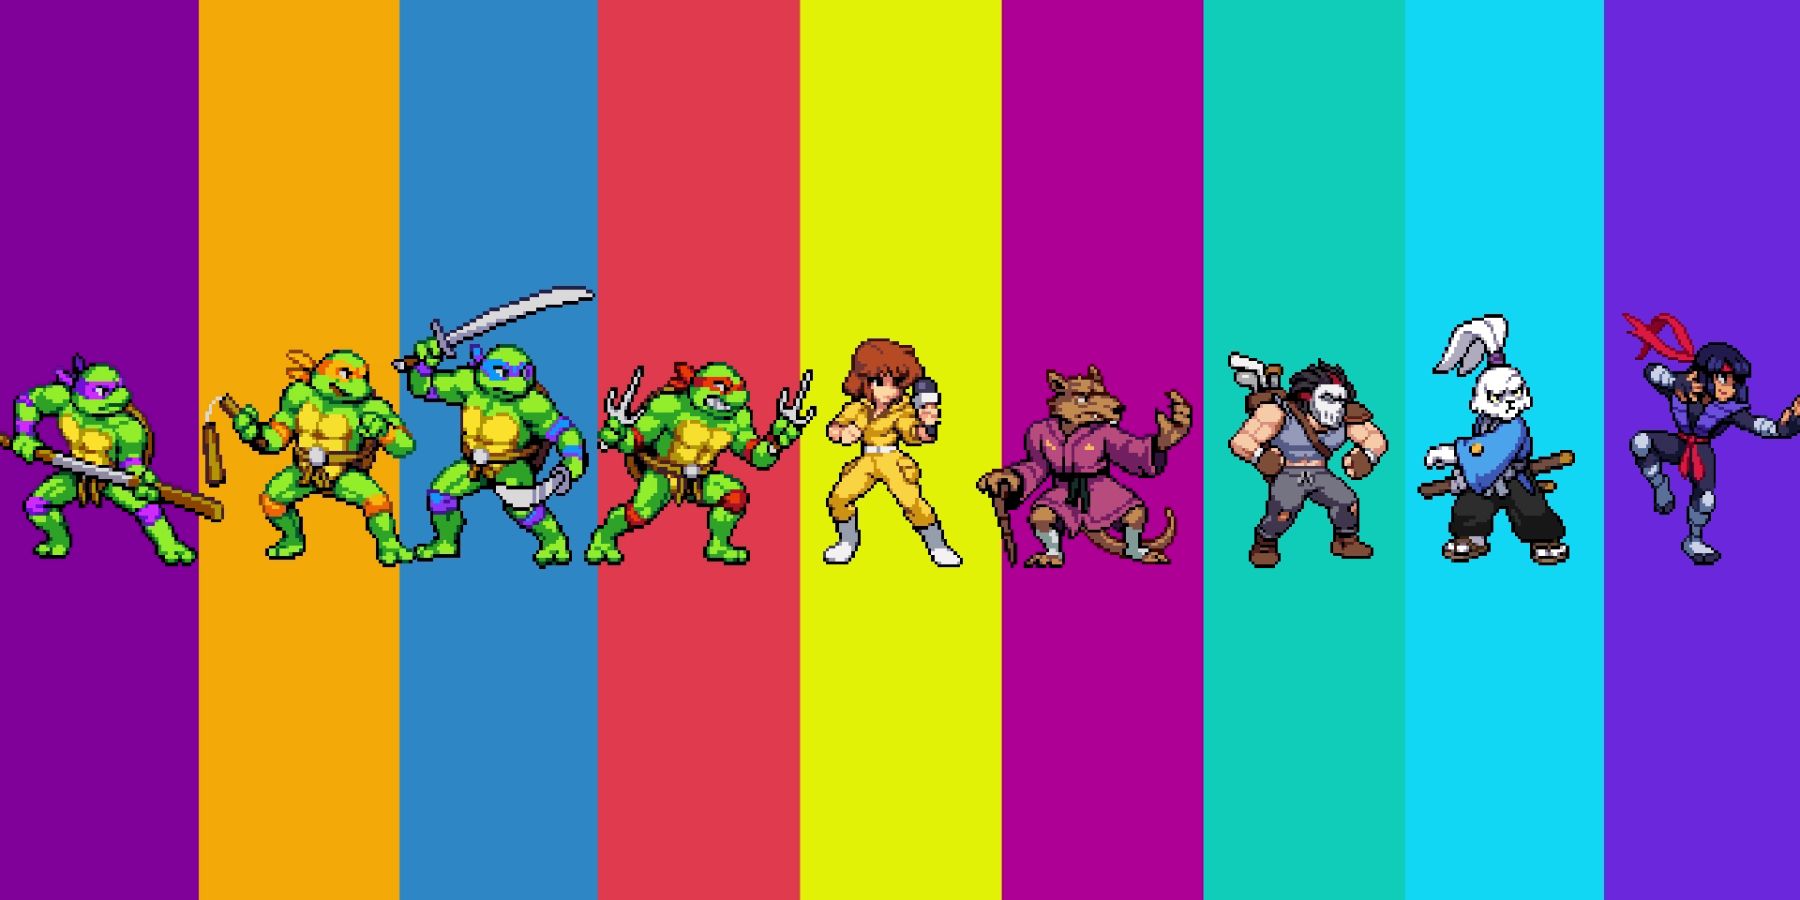 All nine playable character sprites from Shredder's Revenge, including the two newest coming in the Dimension Shellshock DLC, Karai and Miyamoto Usagi, who are on the far right of the image. Each sprite has its own distinctly colored vertical column extending from the top to the bottom of the image.